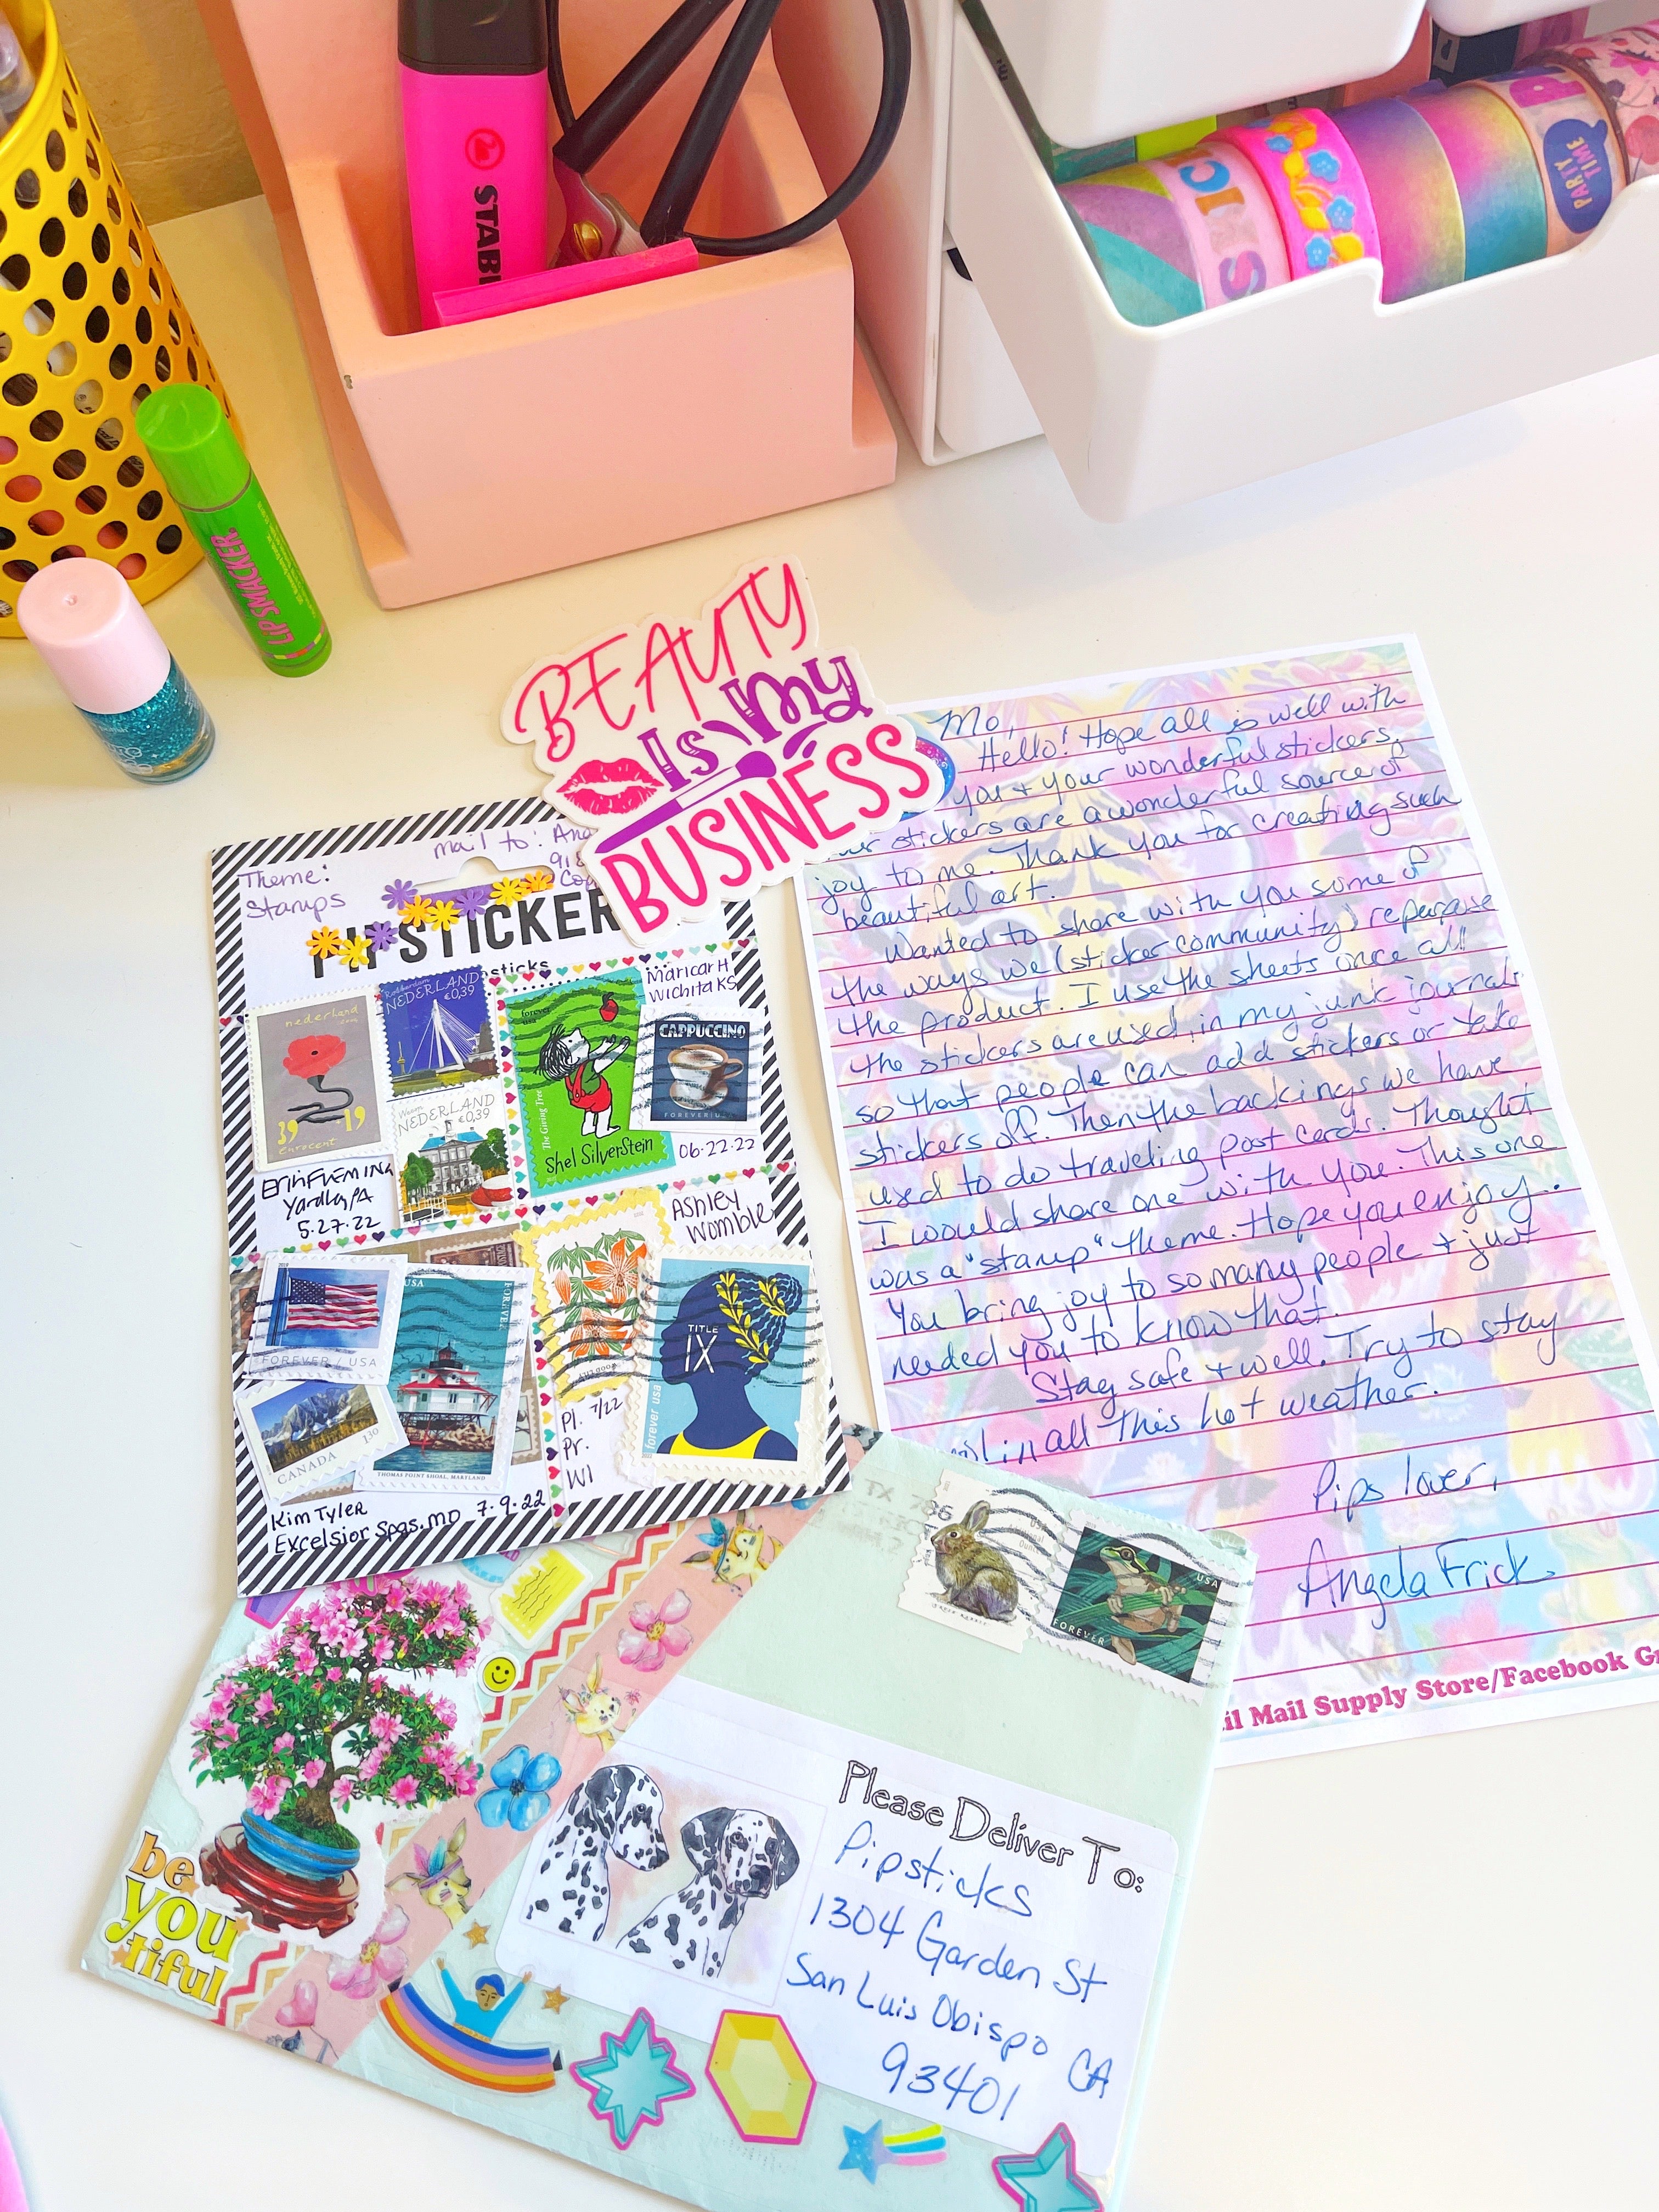 Fanmail Friday: “Thank you for creating such beautiful art”